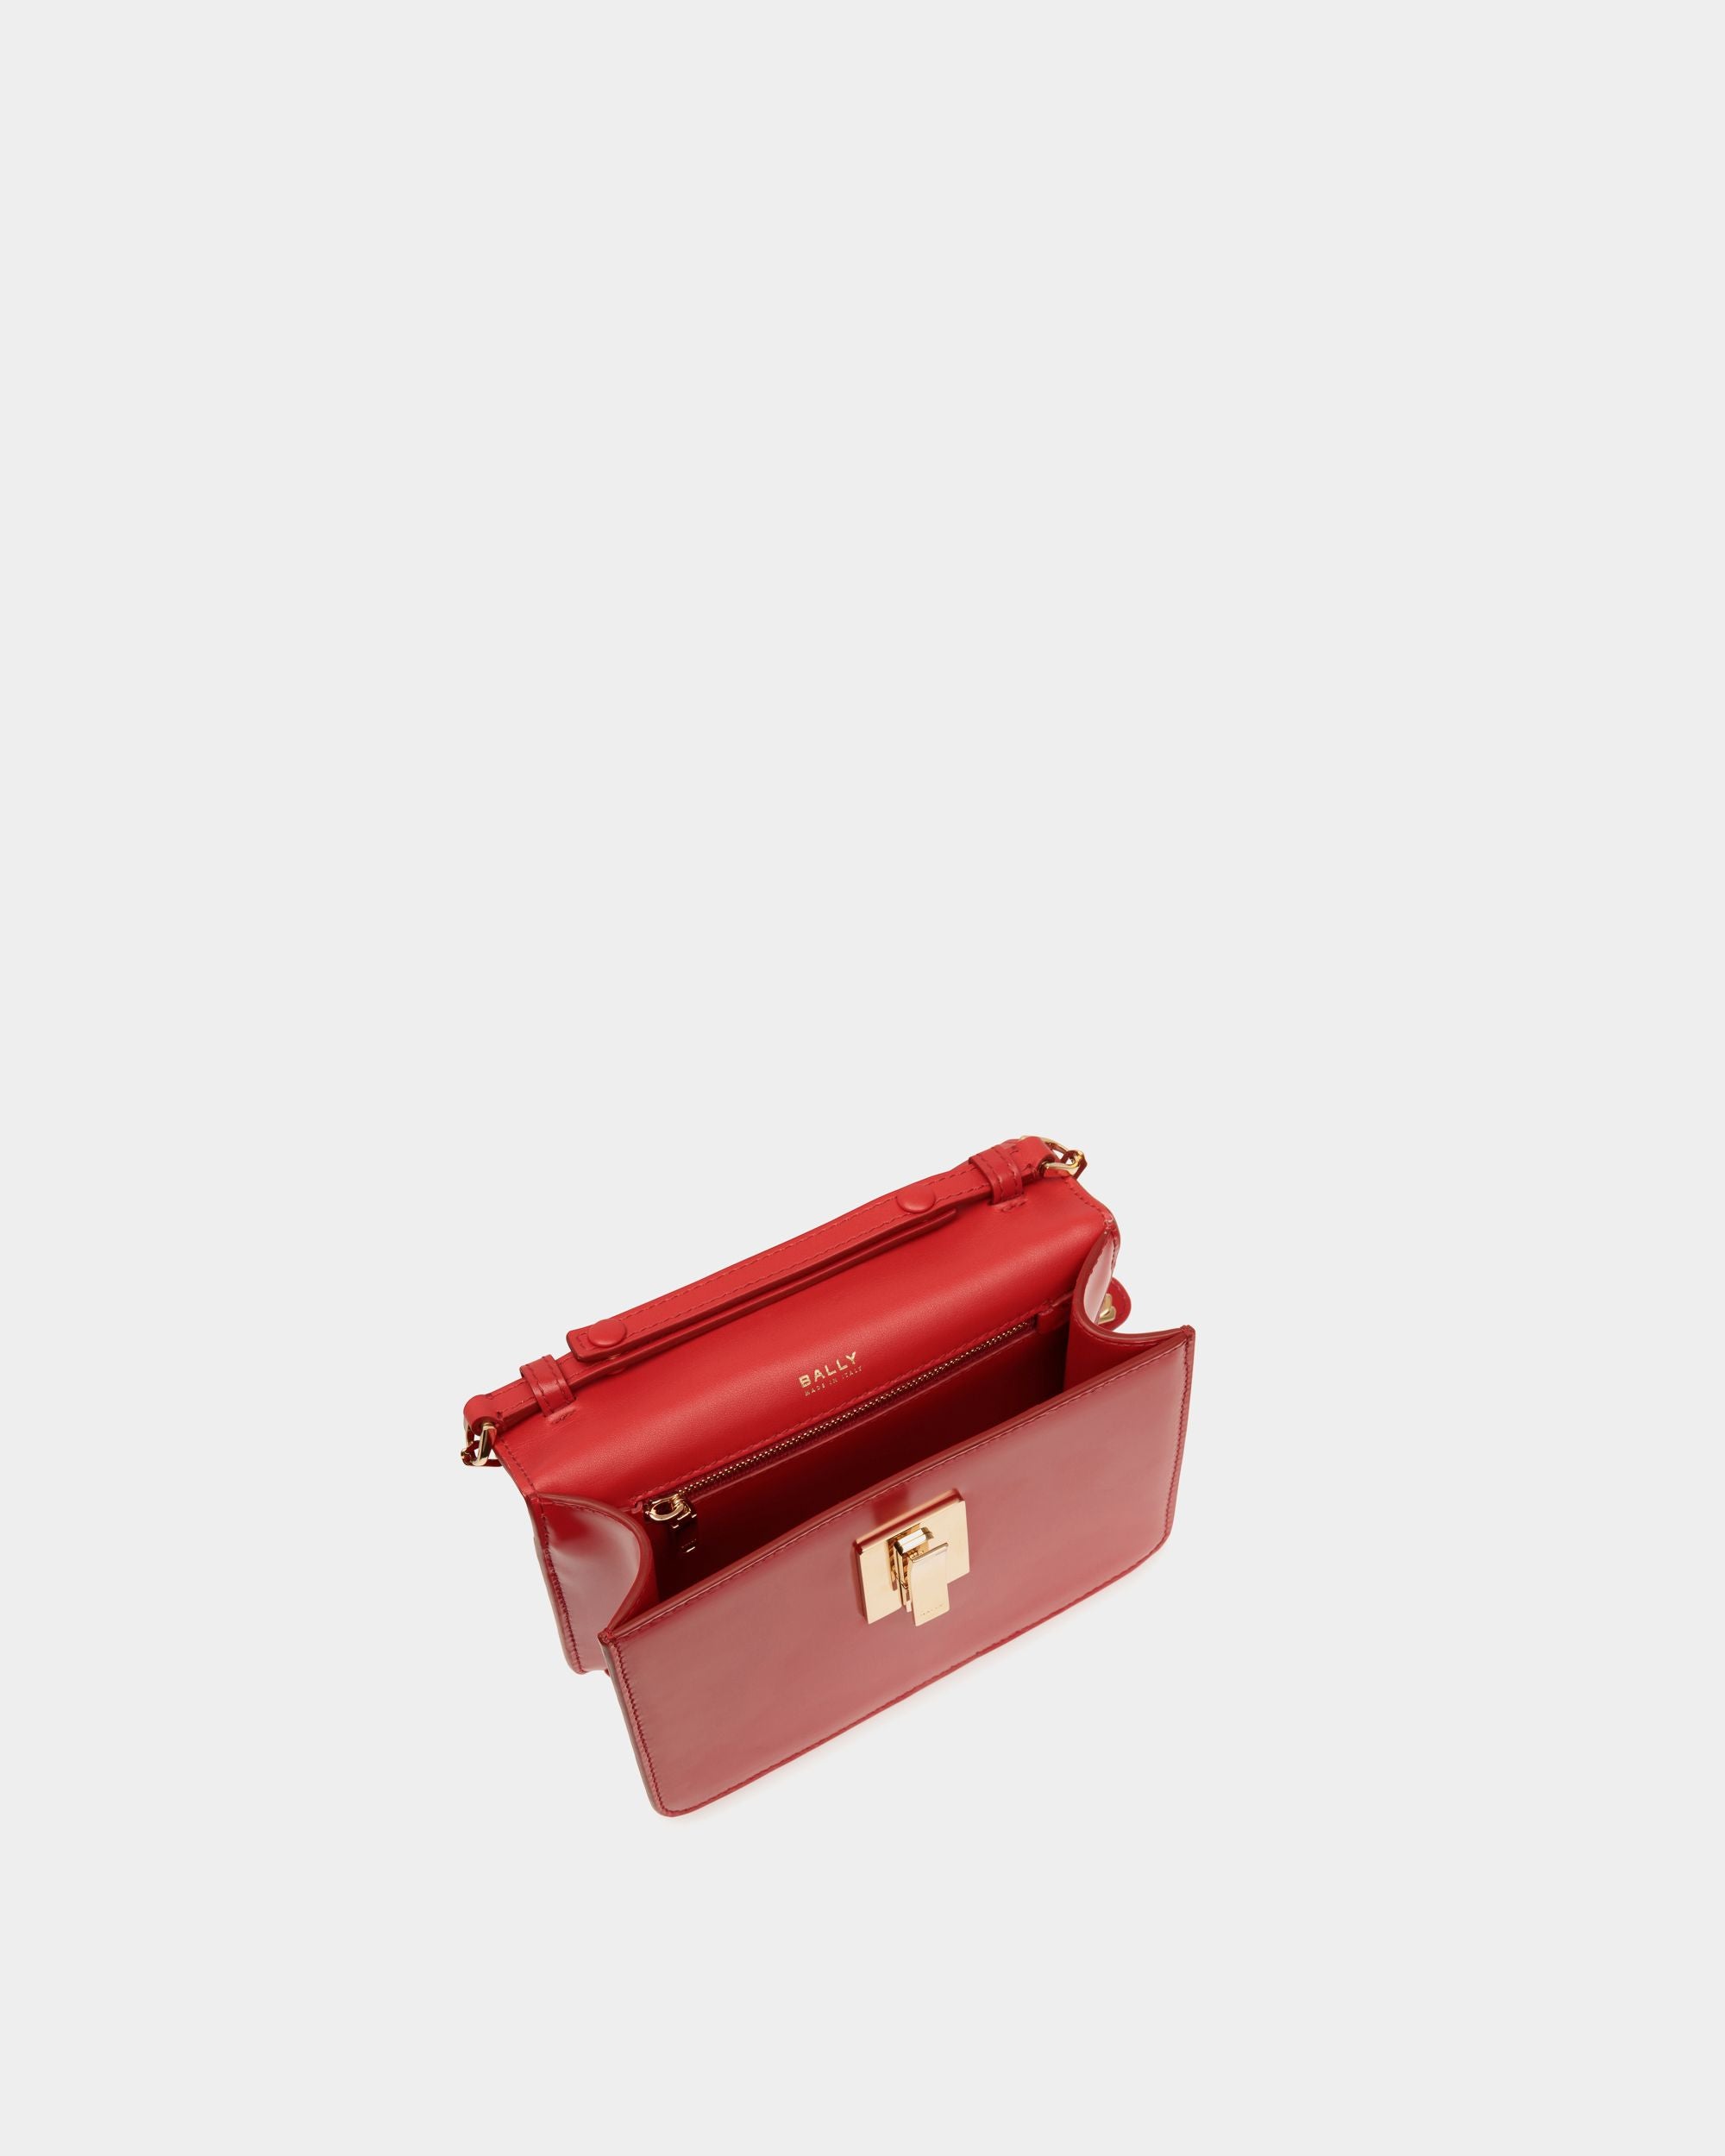 Women's Ollam Mini Top Handle Bag in Candy Red Brushed Leather | Bally | Still Life Open / Inside